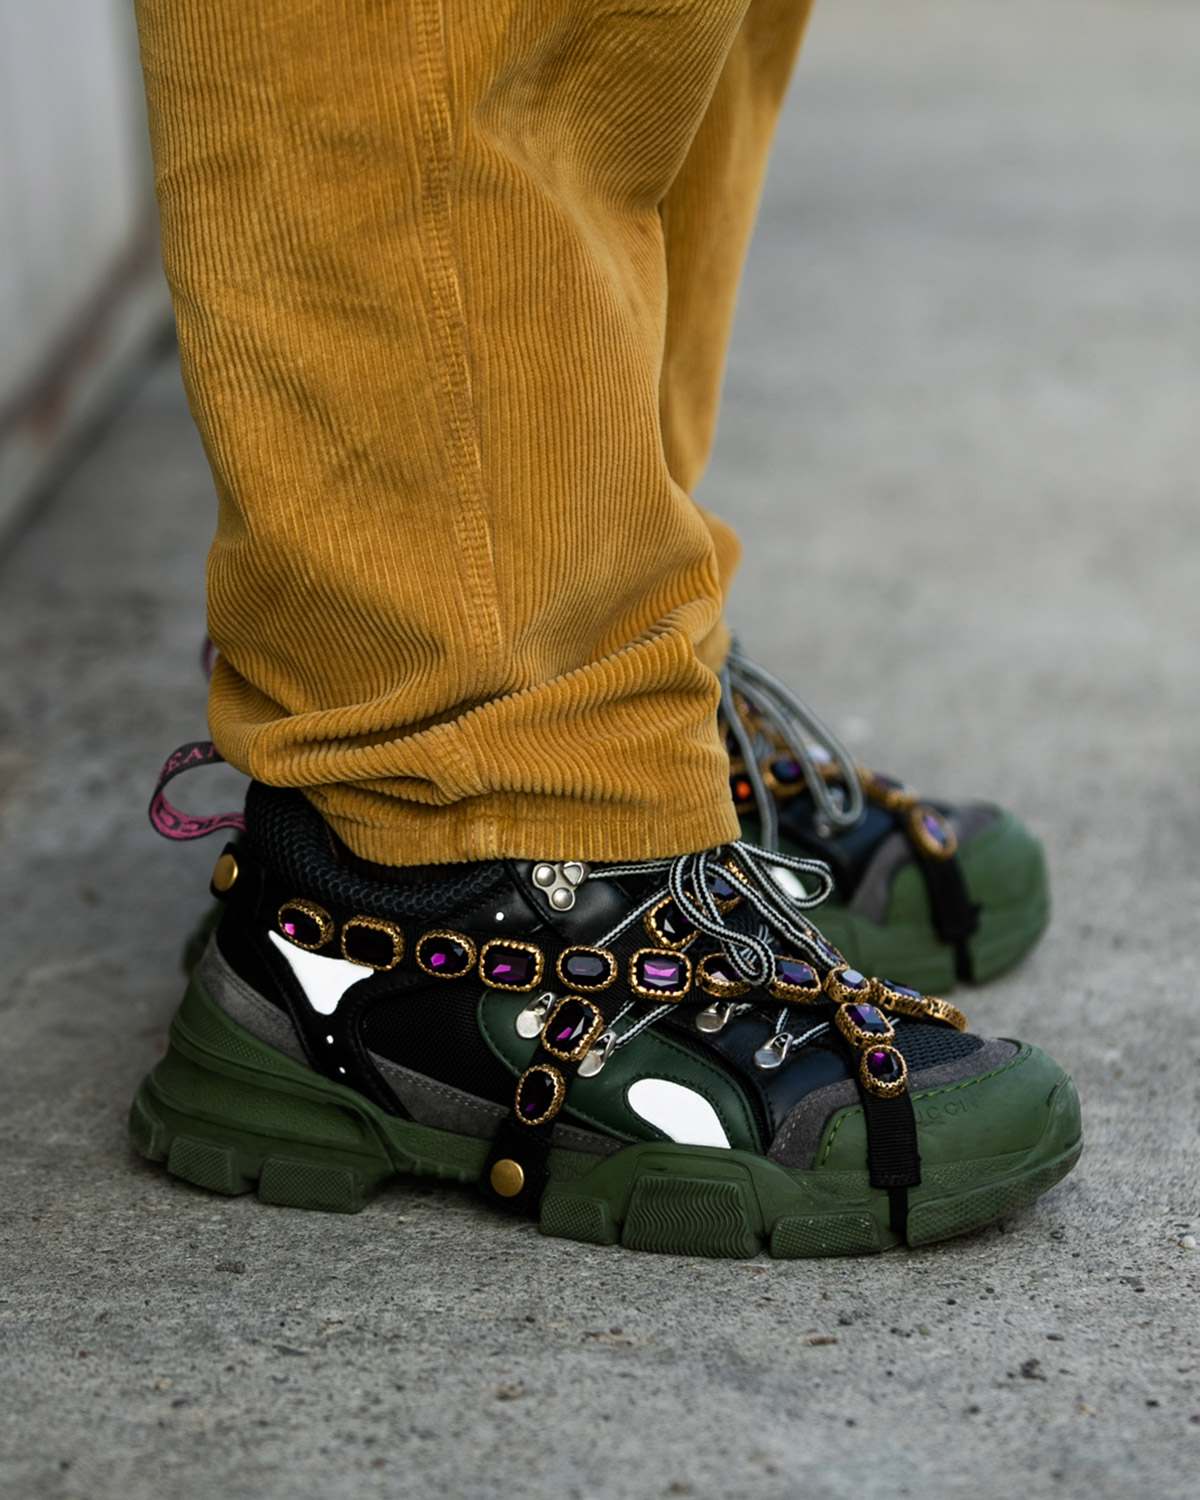 The Best Gucci Sneakers for Men For Any Occasion